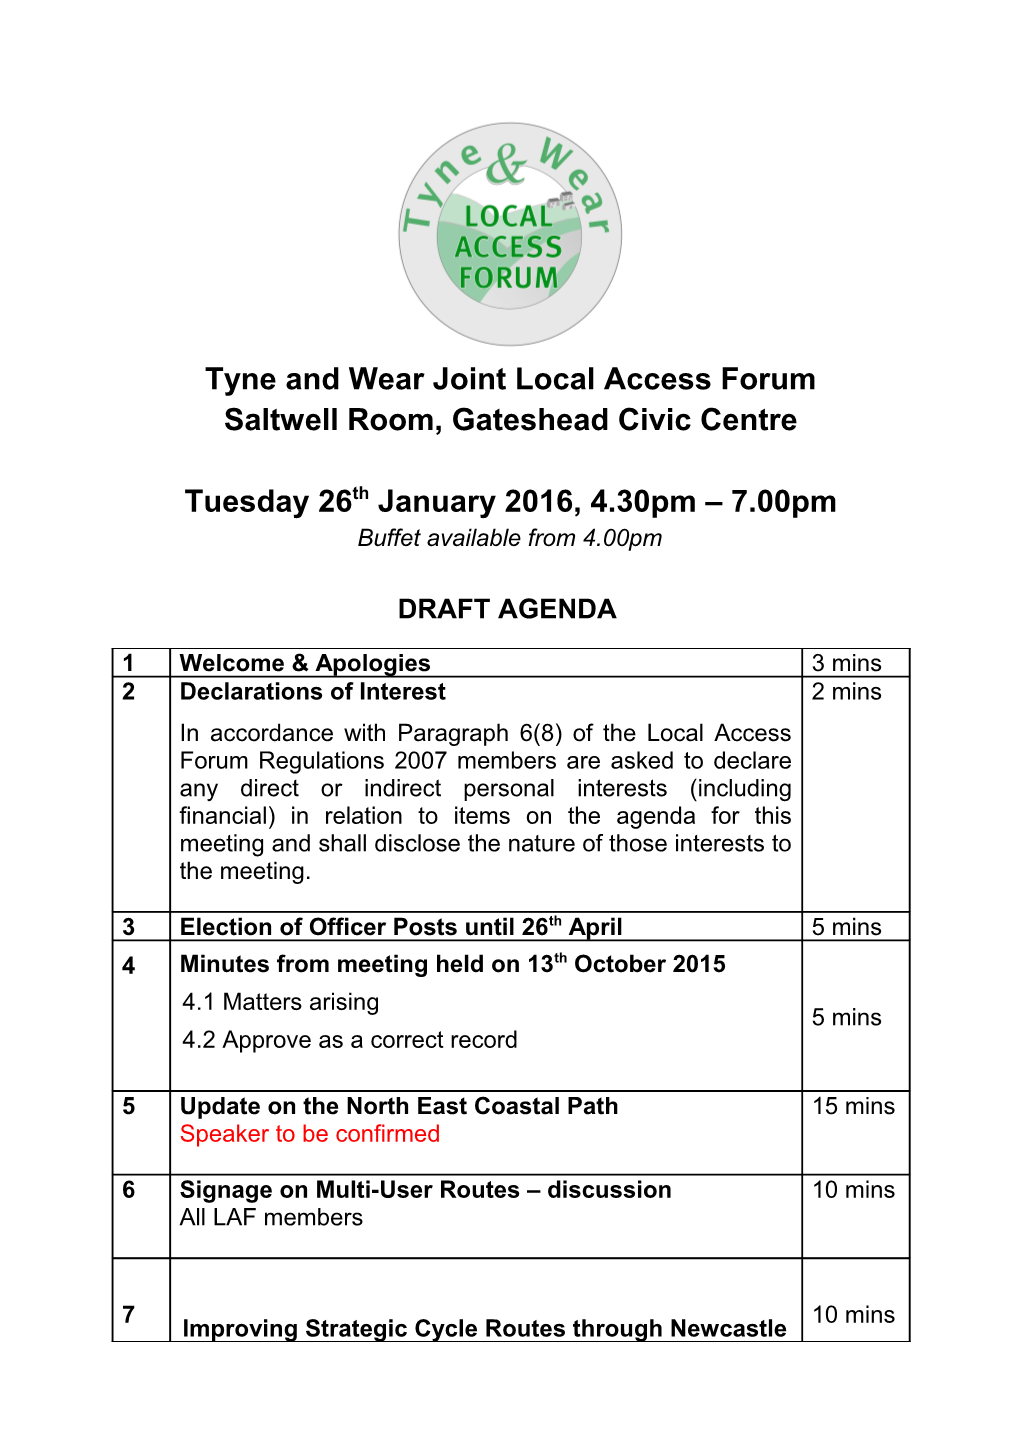 Tyne and Wear Local Access Forum